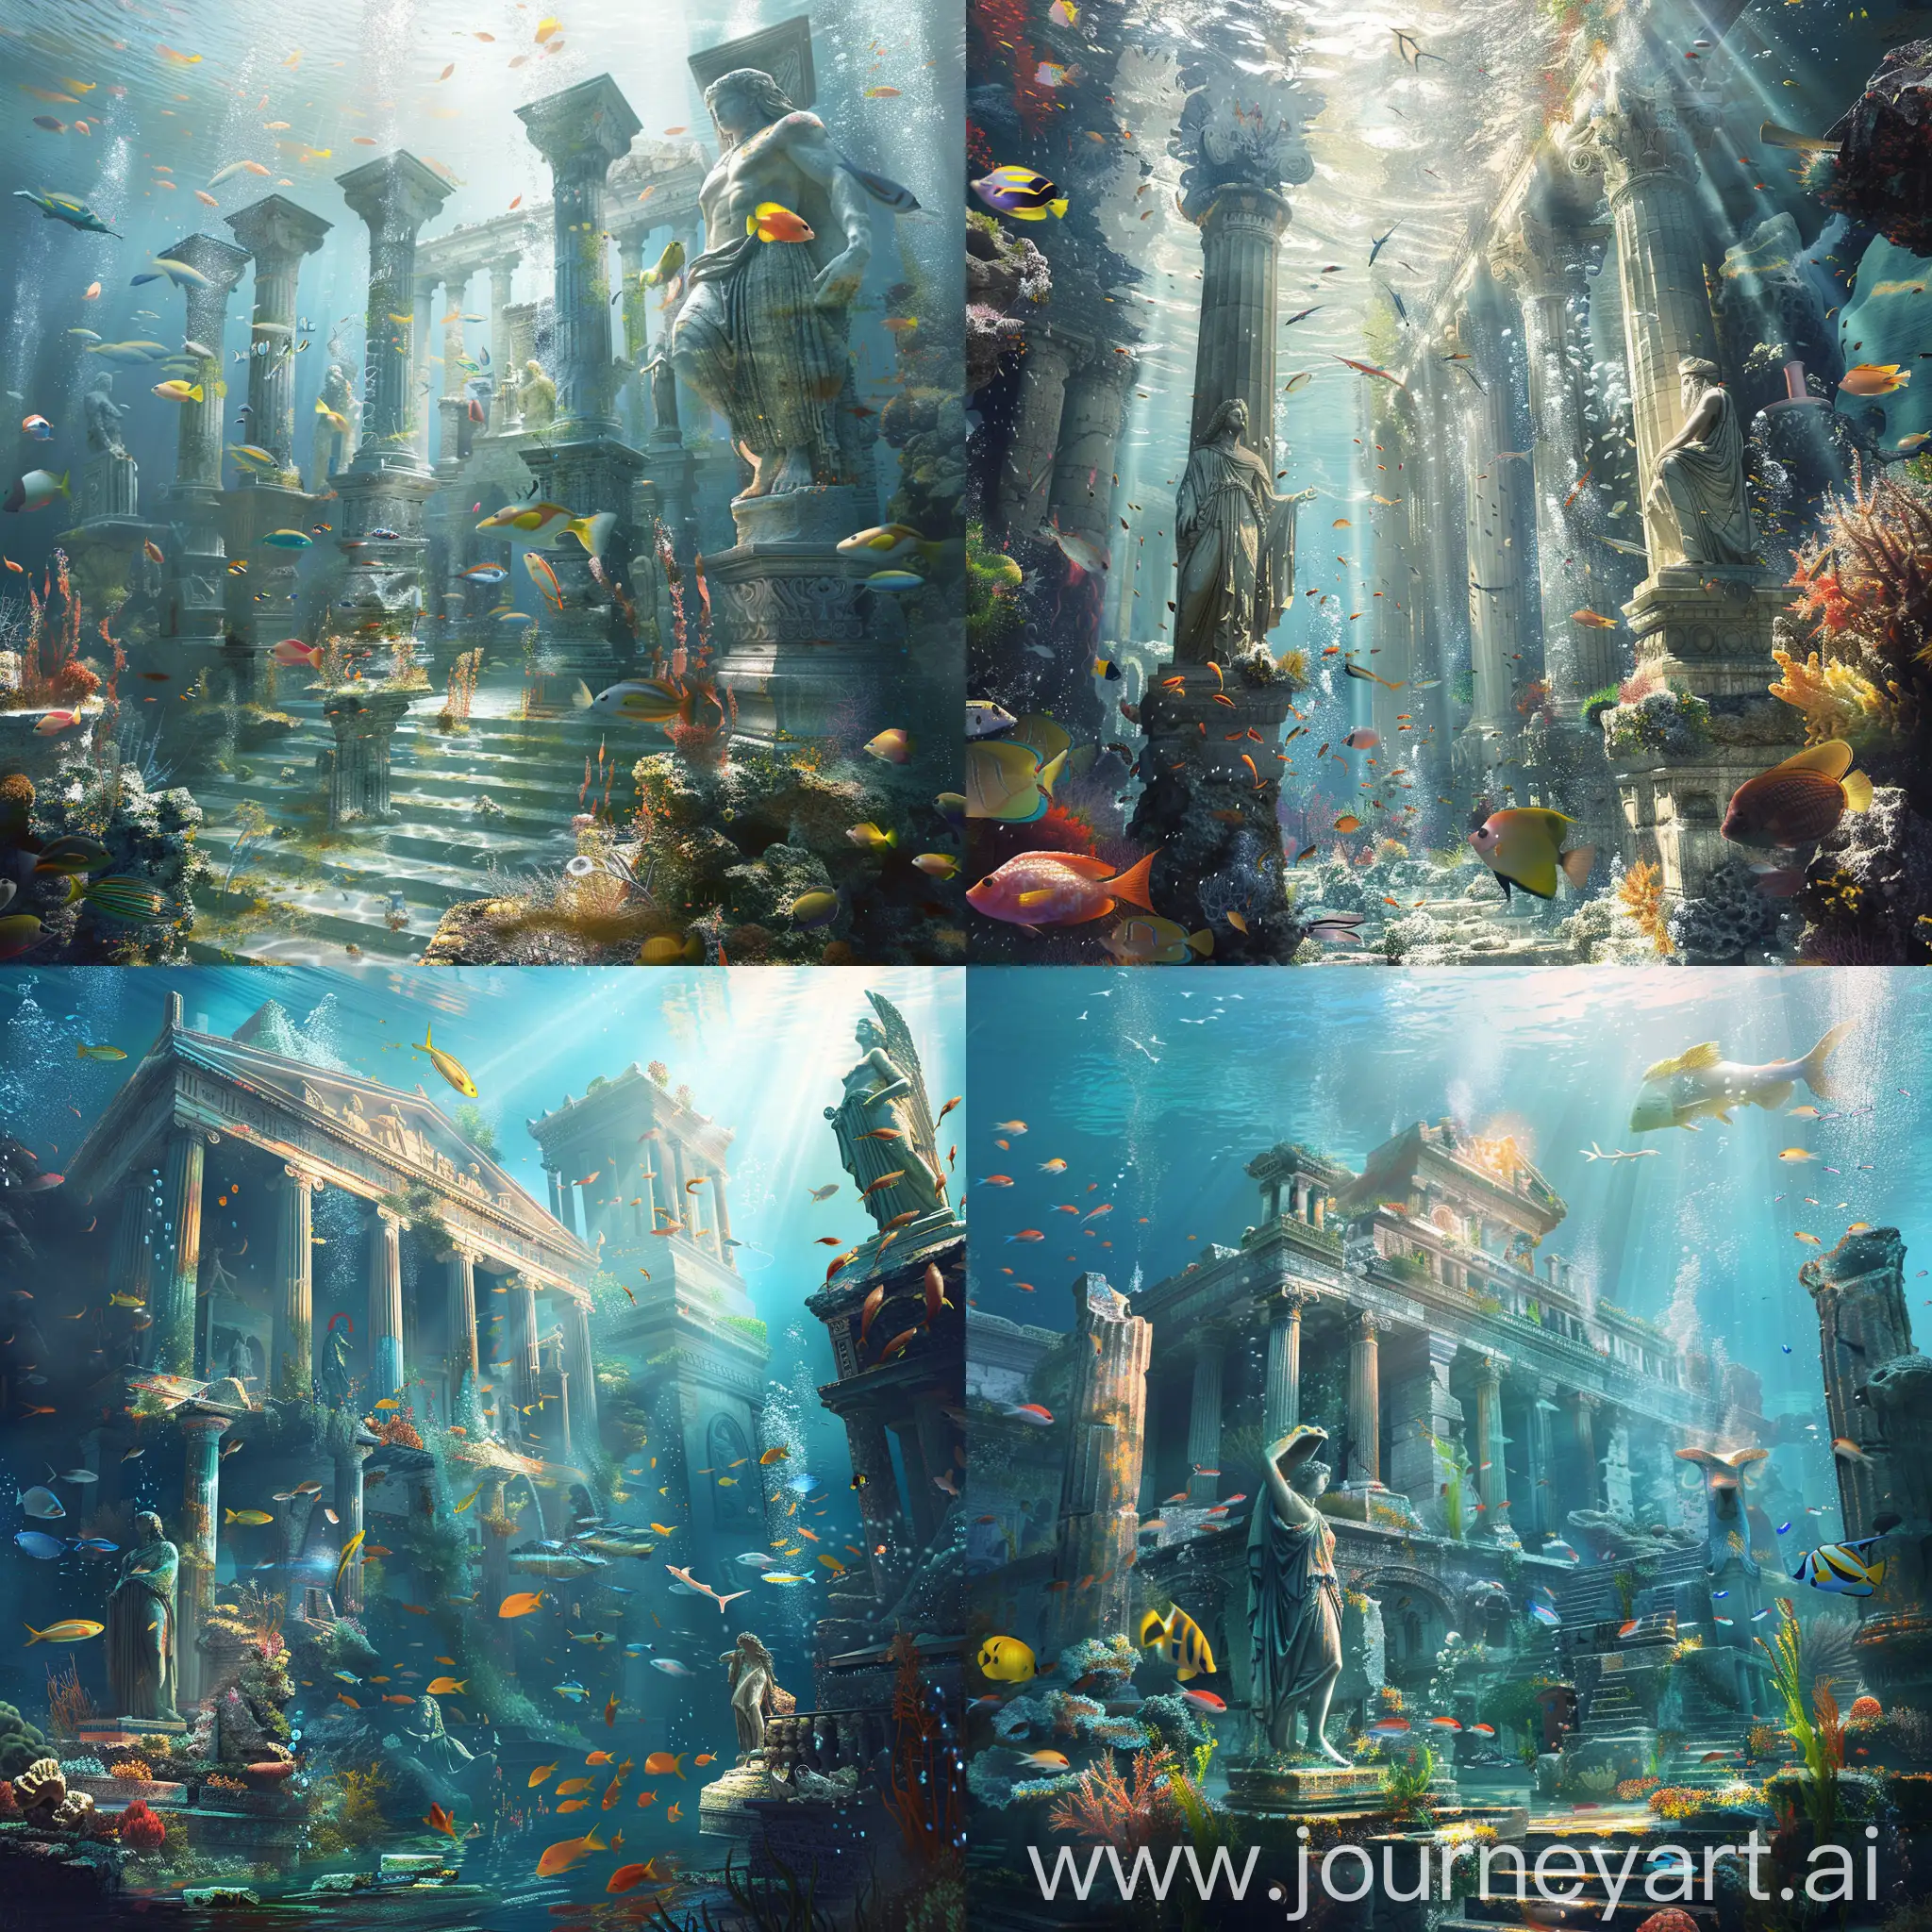 Discover Atlantis underwater, merging ancient Greek architecture with mythical statues, surrounded by colorful fish and a guardian sea creature. The light plays through the water, adding an ethereal touch. Aim for a style that combines realism with surrealism, focusing on texture and a dreamy palette.